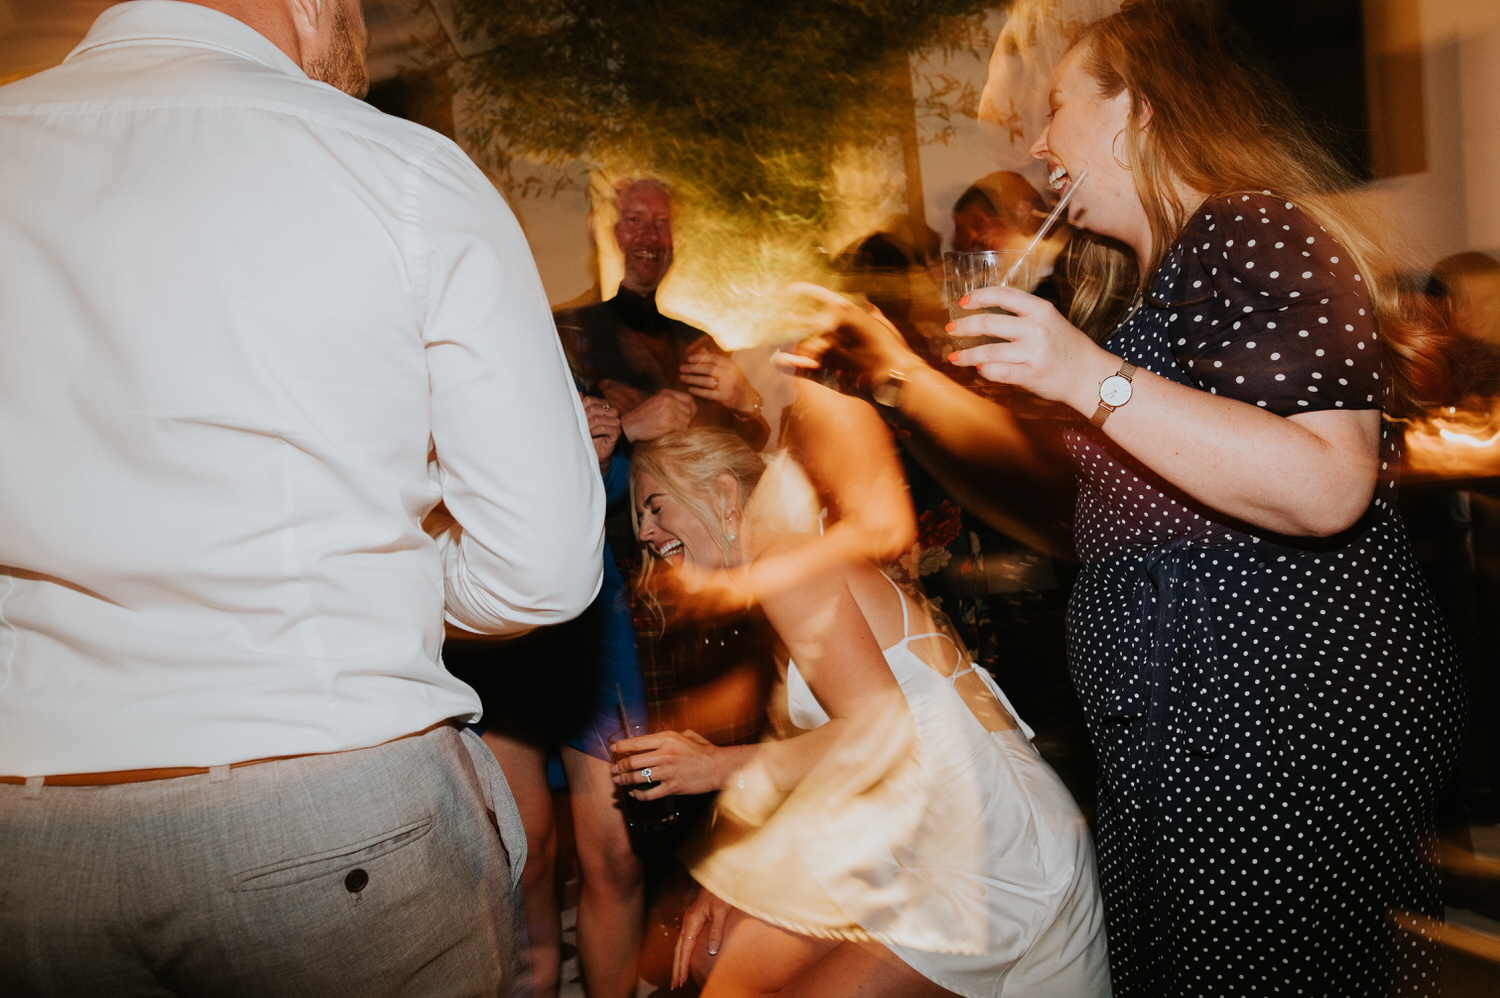 Mykonos wedding photographer: bride almost falls from the laughter on the dance floor among the guests.